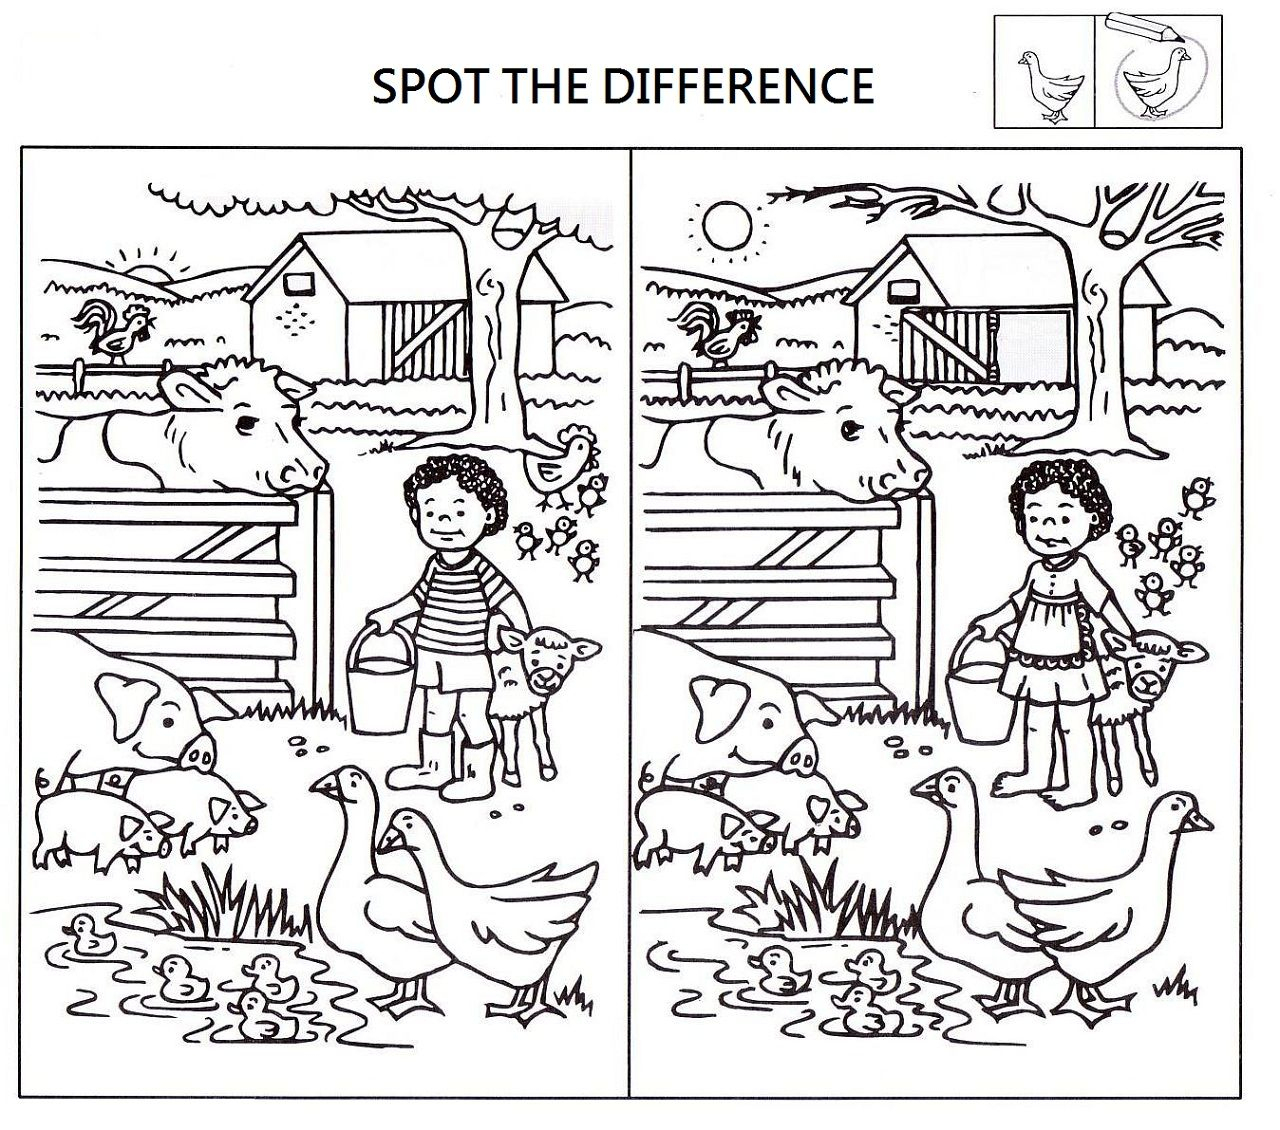 Spot The Difference Worksheets For Kids | English Language | Spot - Printable Spot The Difference Puzzle